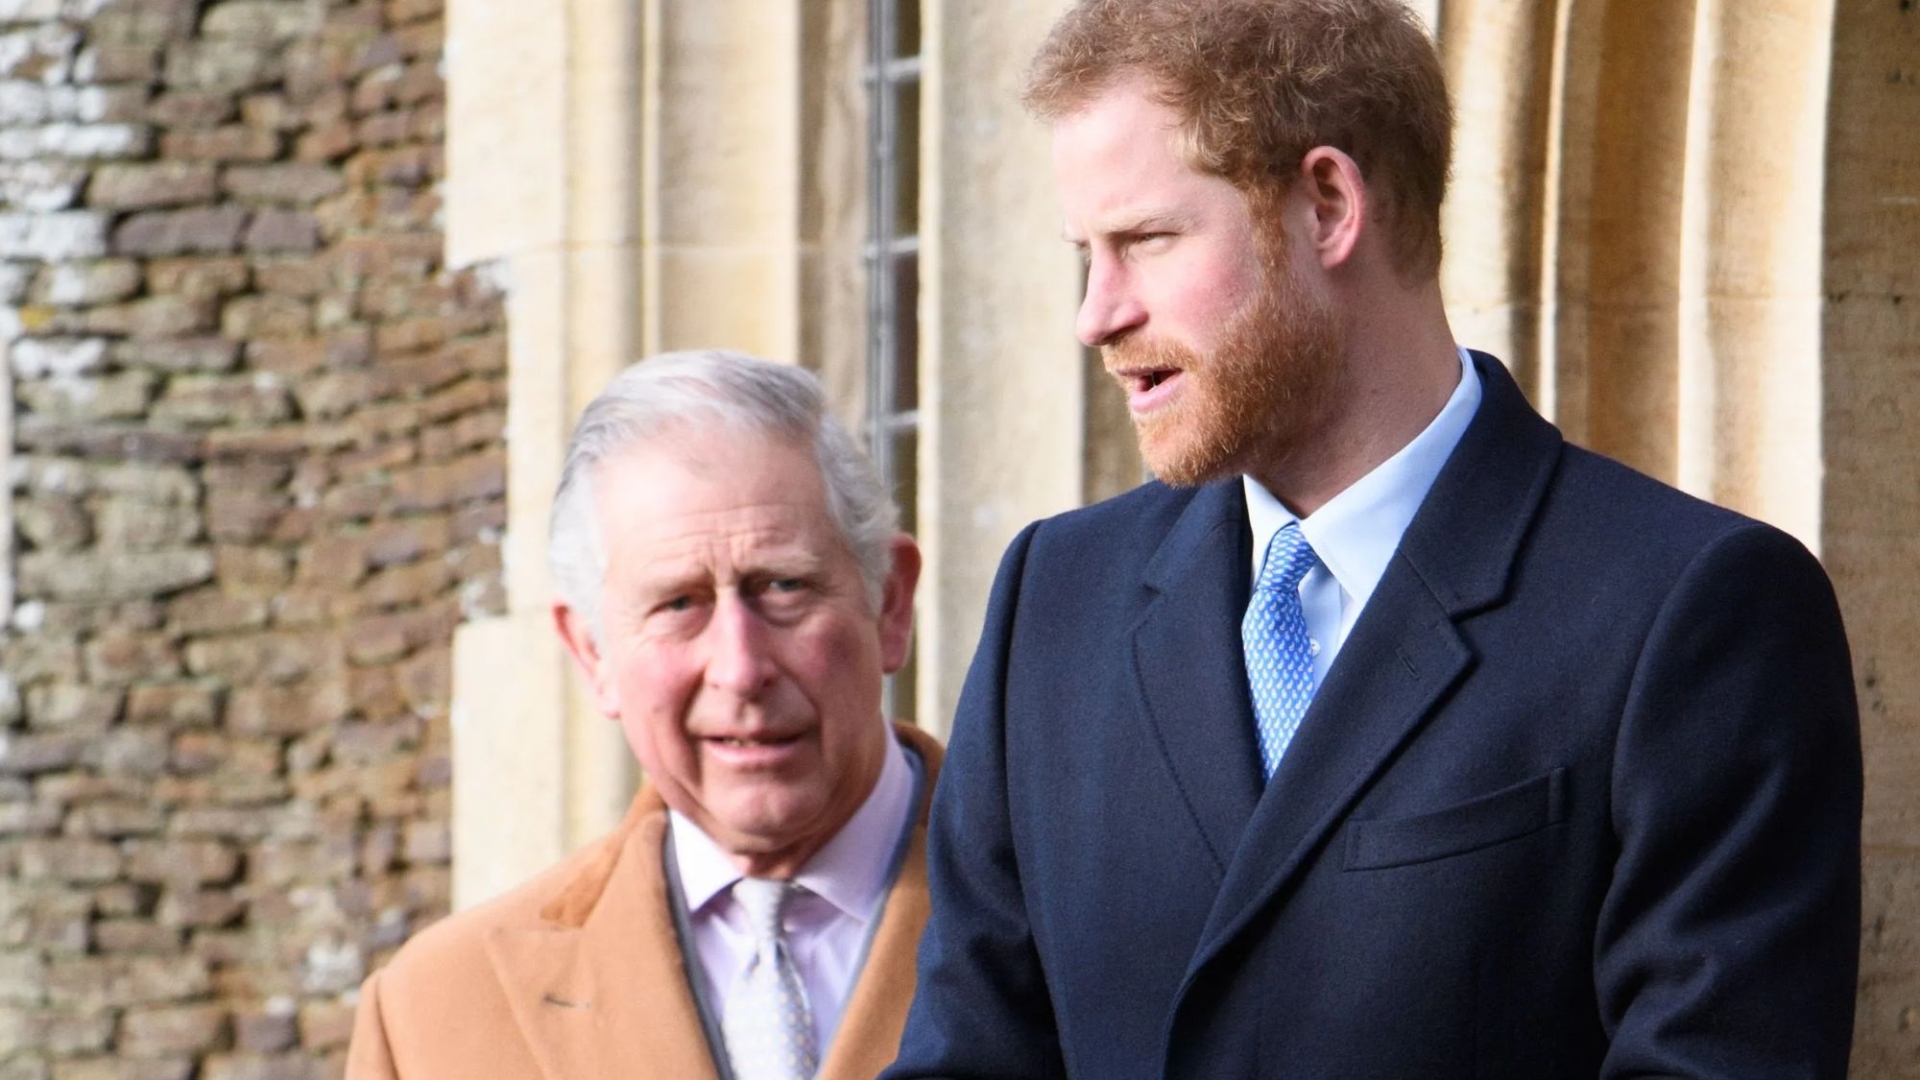 Strange Nostradamus prediction: Harry will become king after Charles shock abdication amid Queen death claims